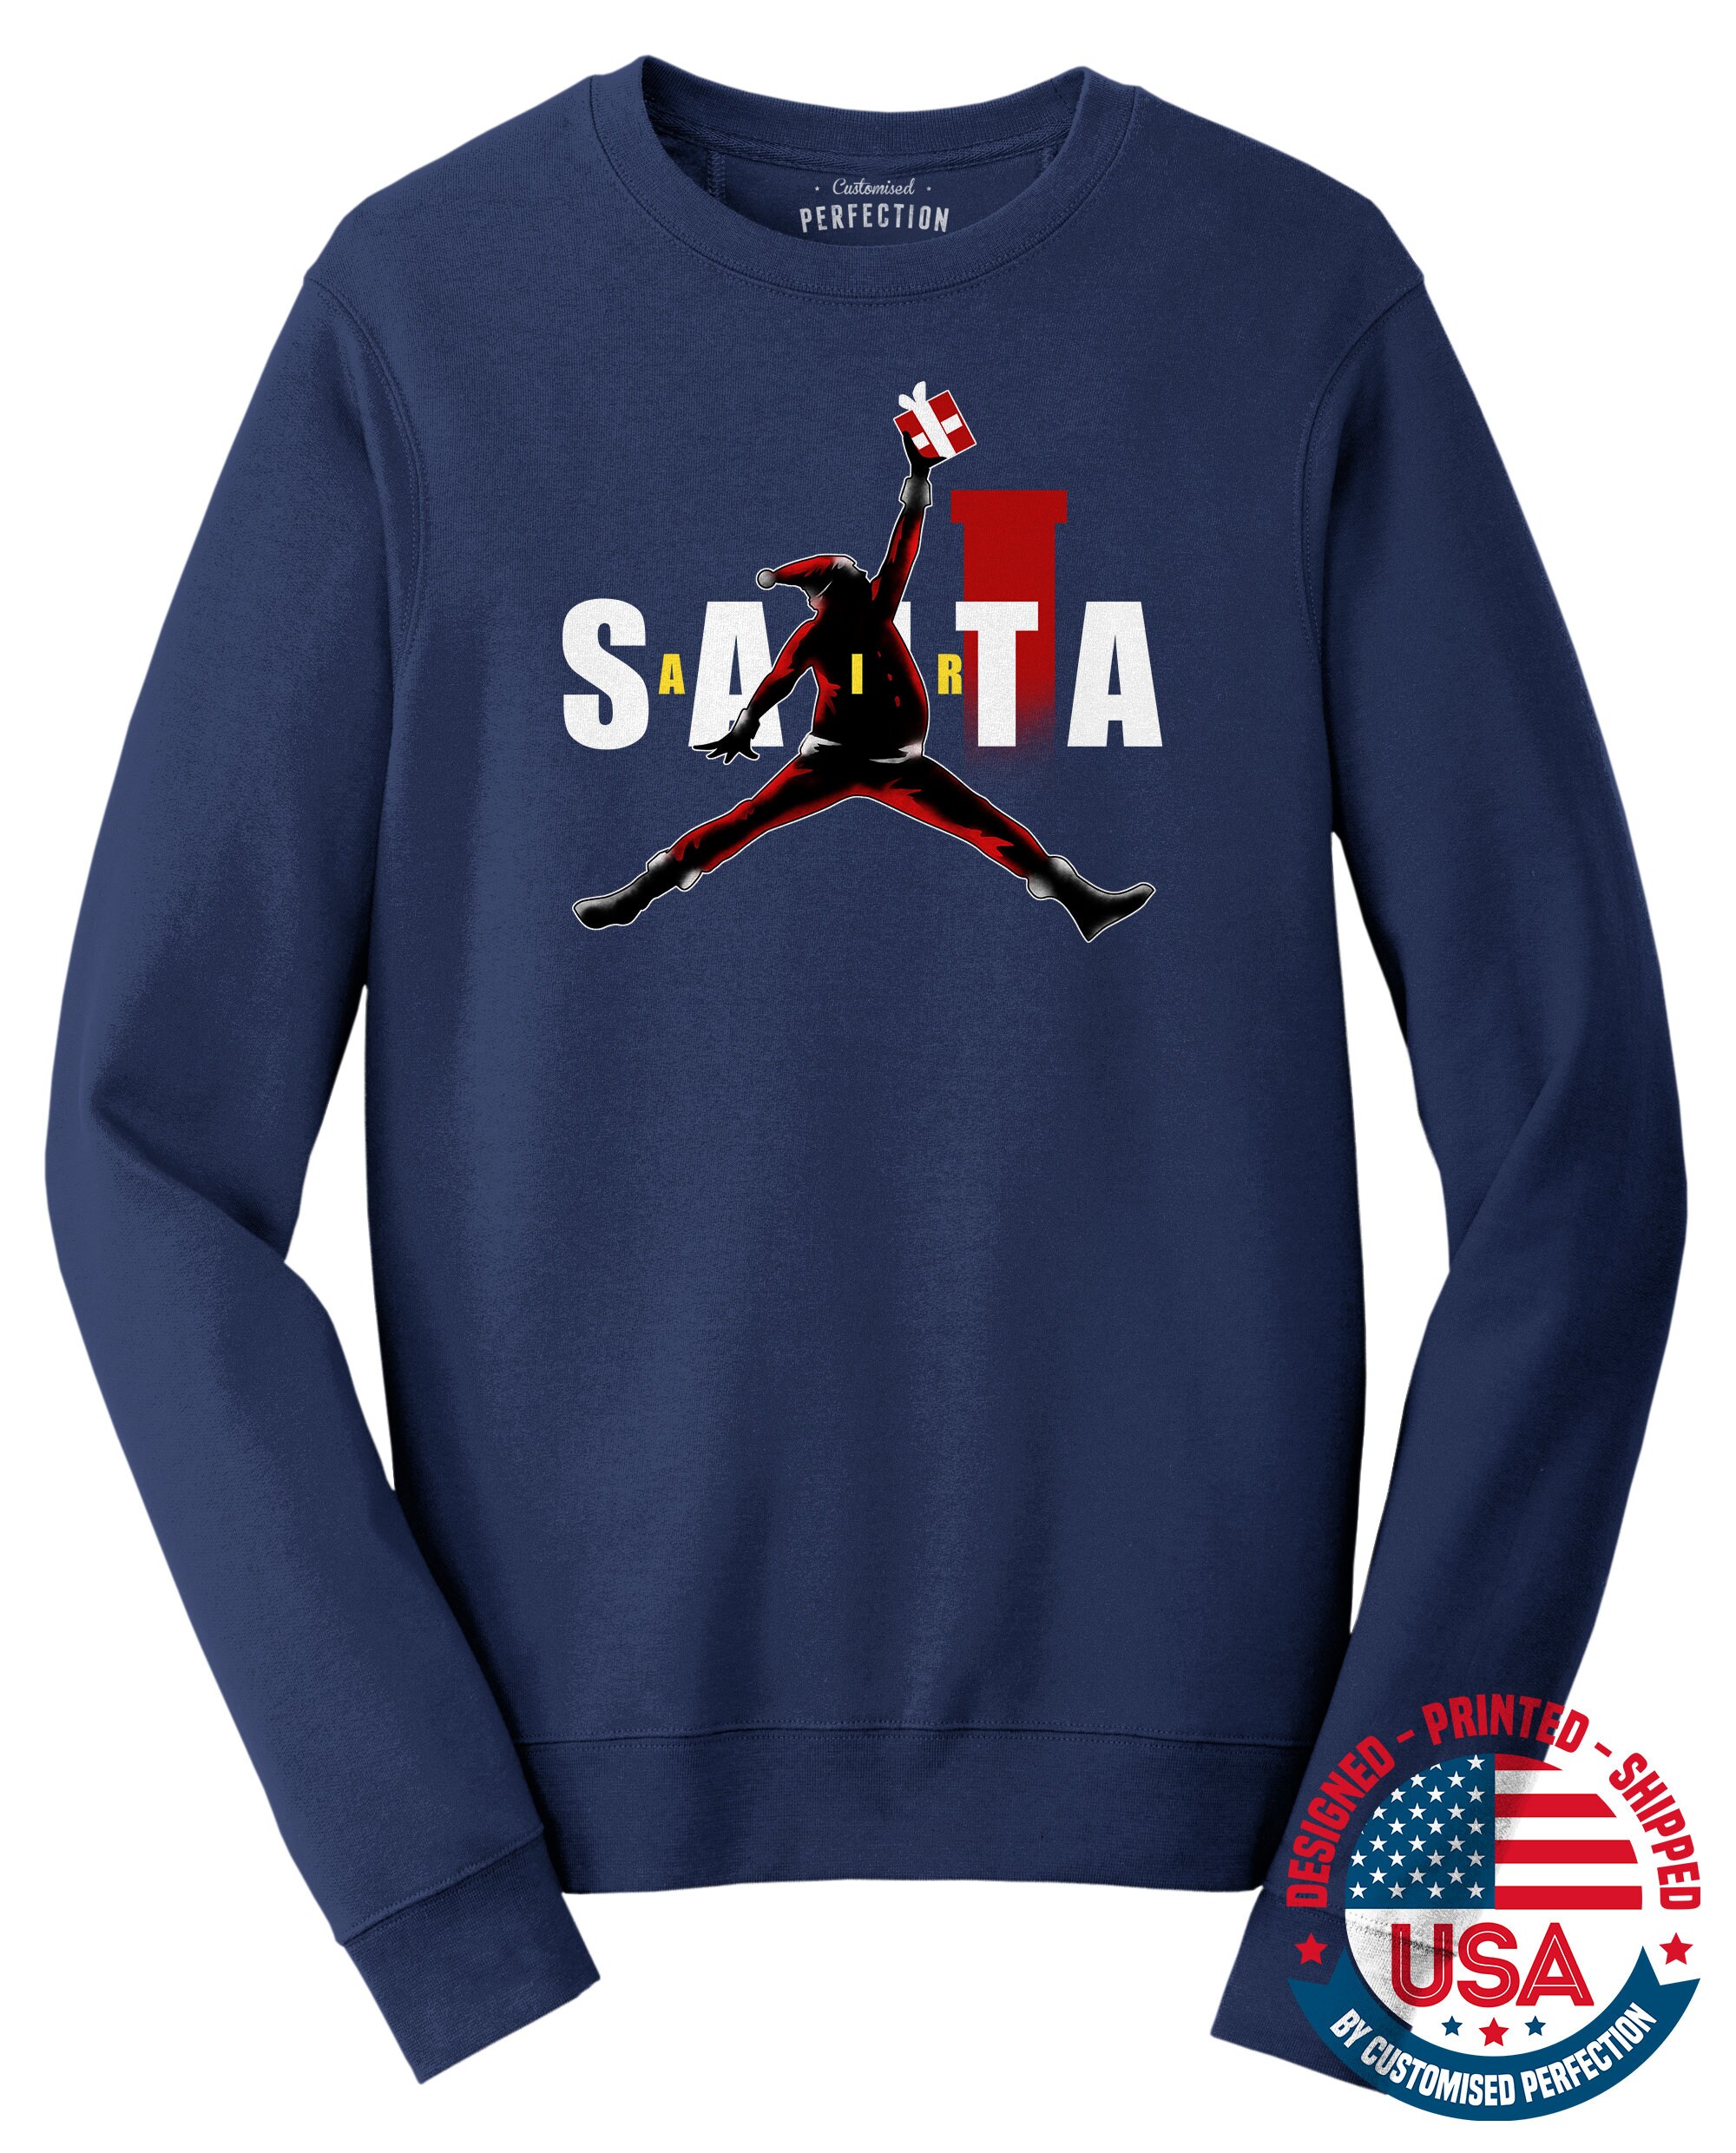  Dunking Santa - Ugly Christmas Sweatshirt - Funny Christmas  Sweater for Men and Women (Black, Small) : Clothing, Shoes & Jewelry